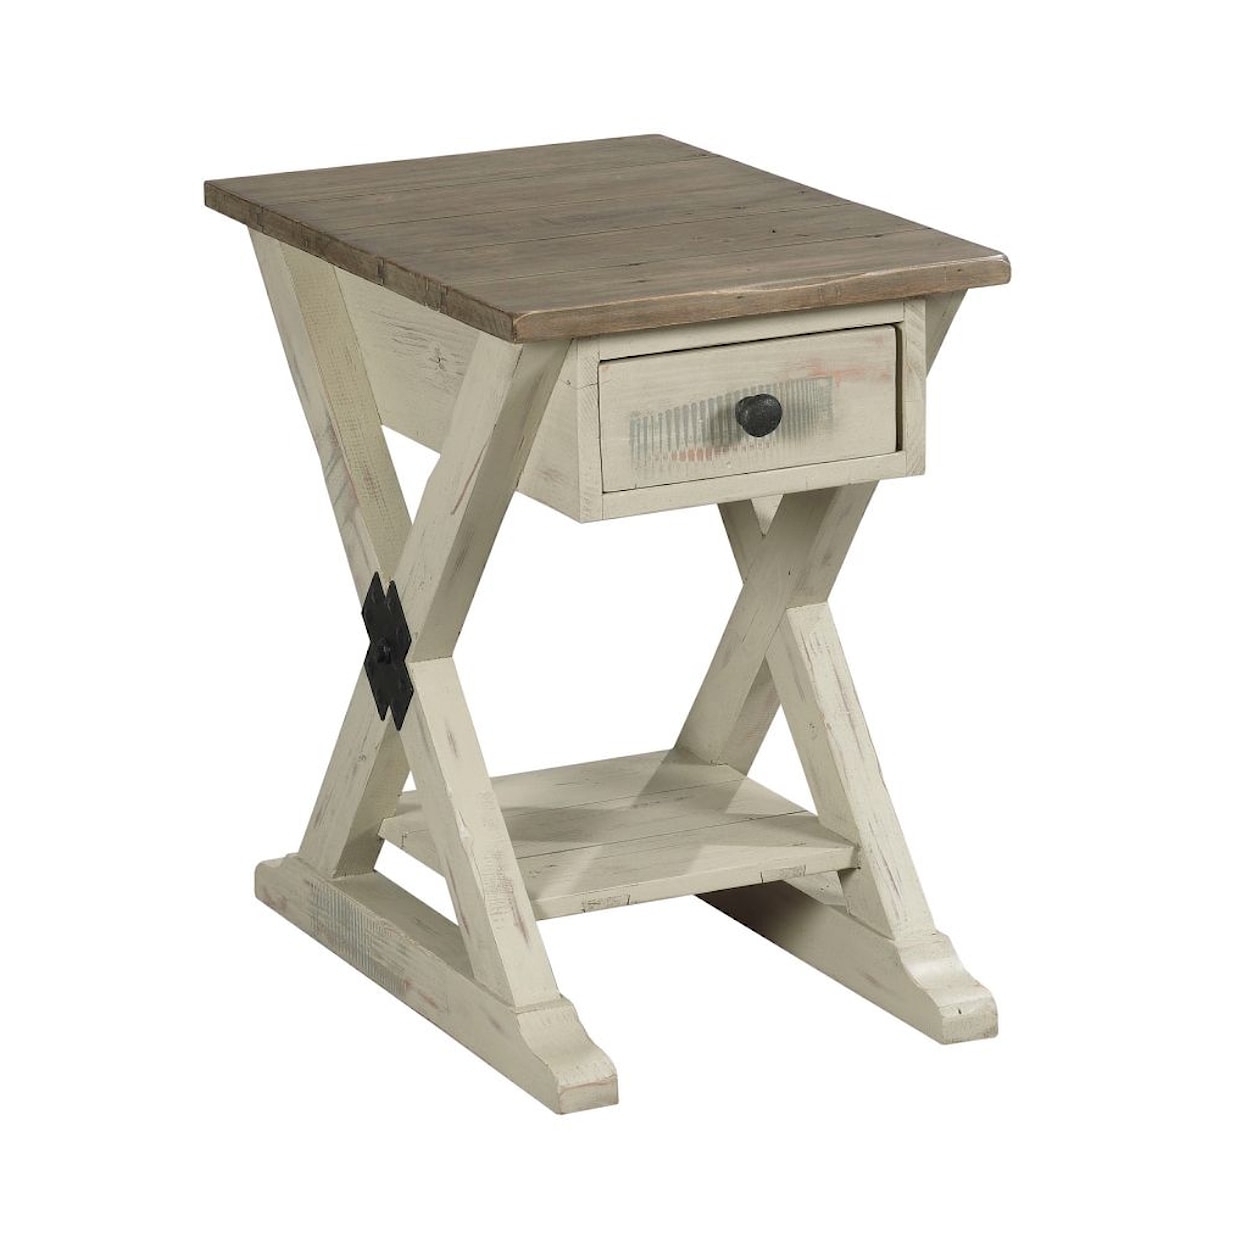 Hammary Reclamation Place Chairside Table